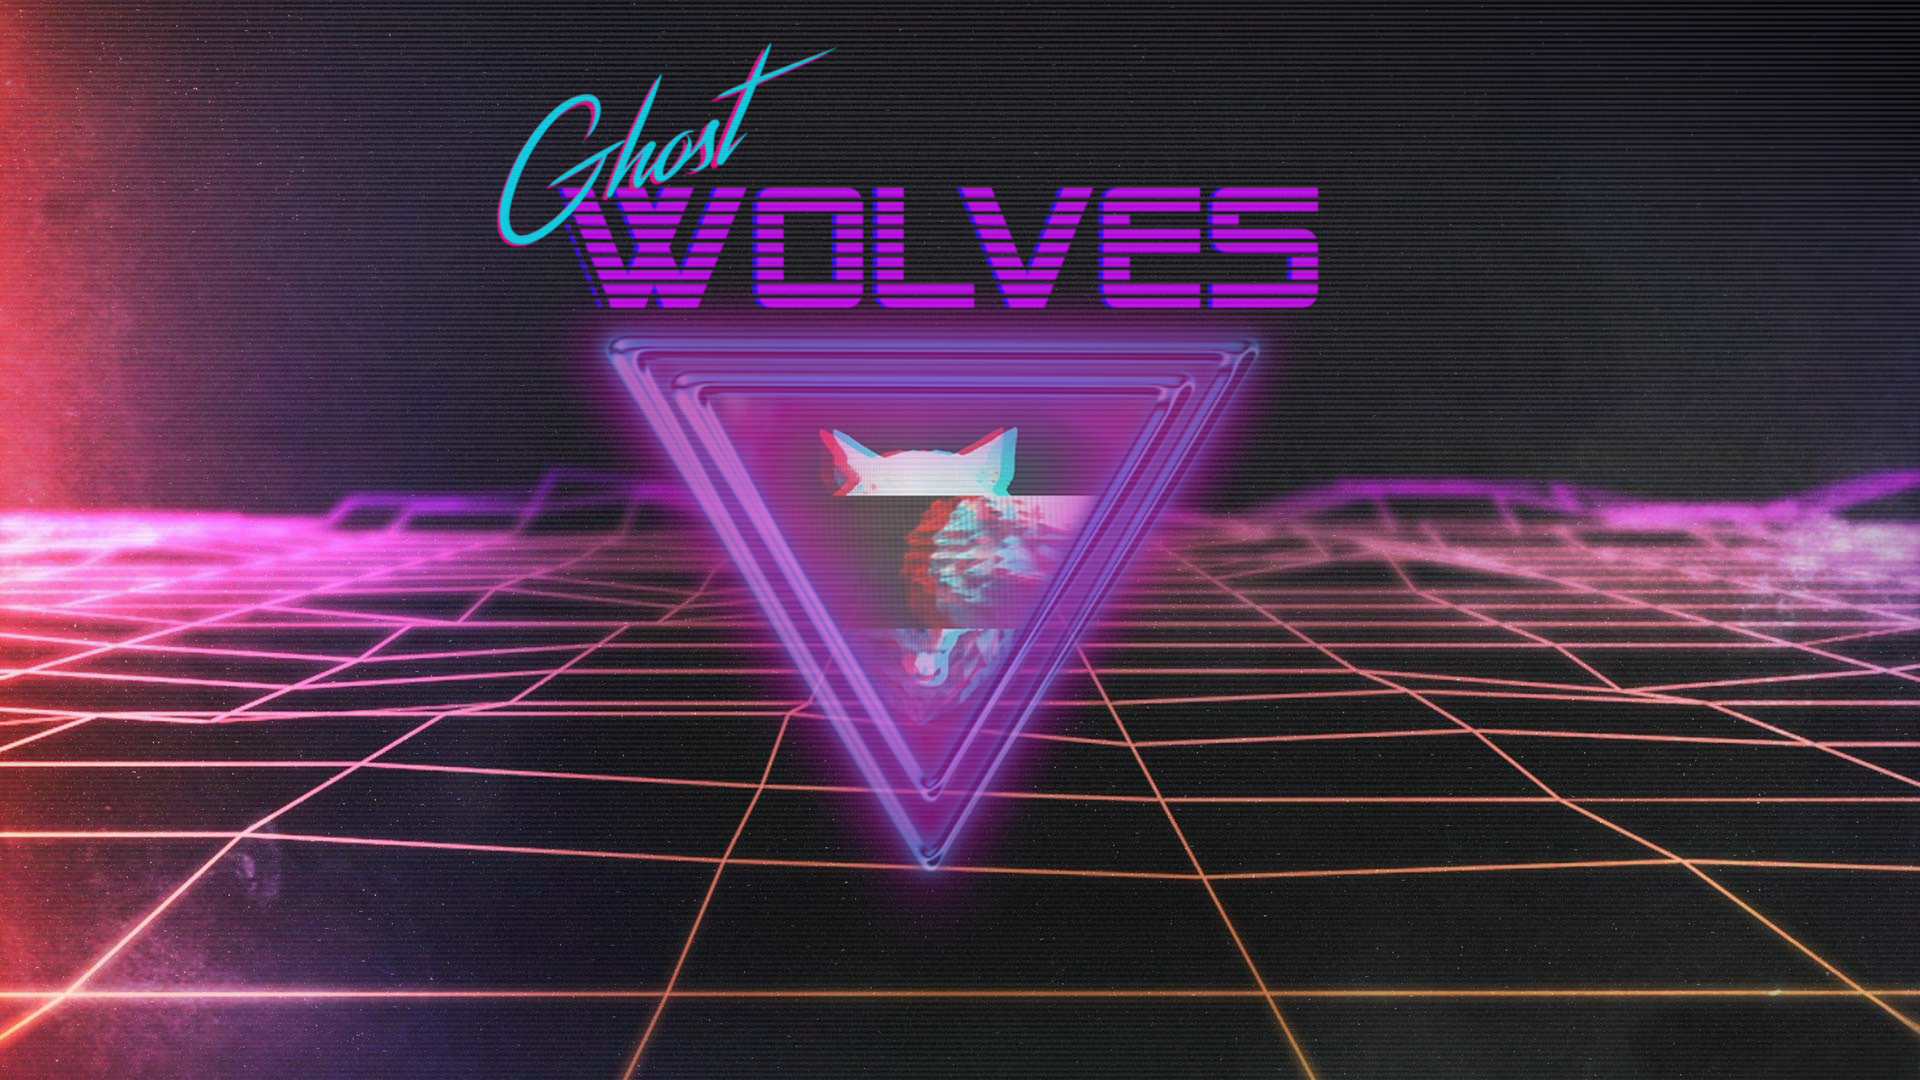 General 1920x1080 1980s synthwave wolf triangle grid retro style neon Hotline Miami Hotline Miami 2: Wrong Number video games VHS New Retro Wave Digital Grid vector CGI digital art